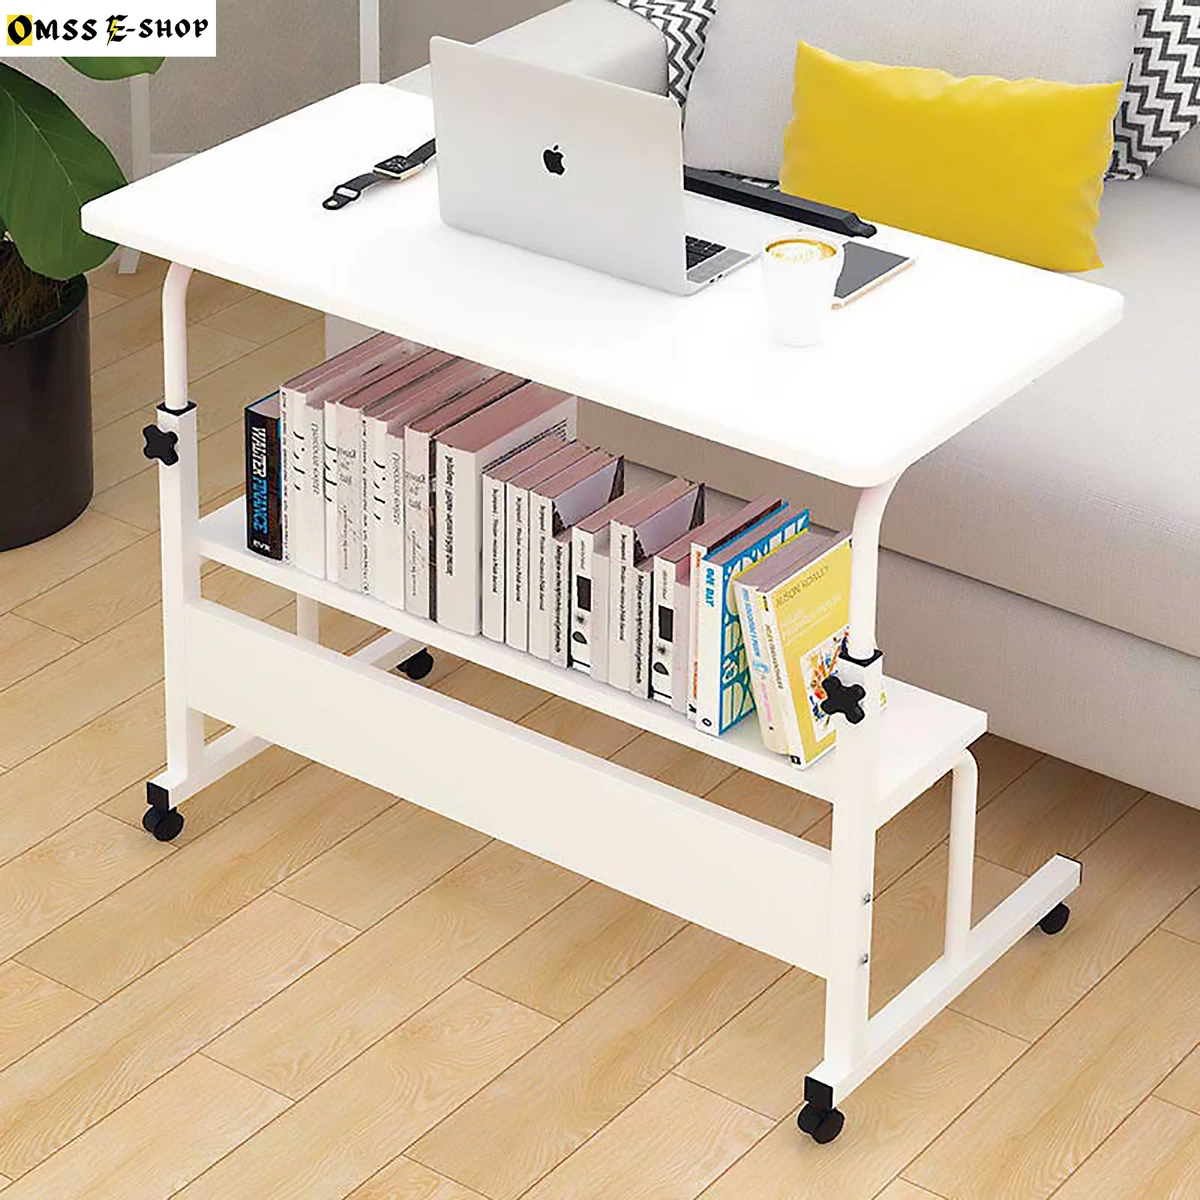 Adjustable Portable Table Laptop, Computer Stand, Cart Tray Side Table for Bed, Sofa, Hospital, Nursing, Reading, Eating RP-1650DH-RE